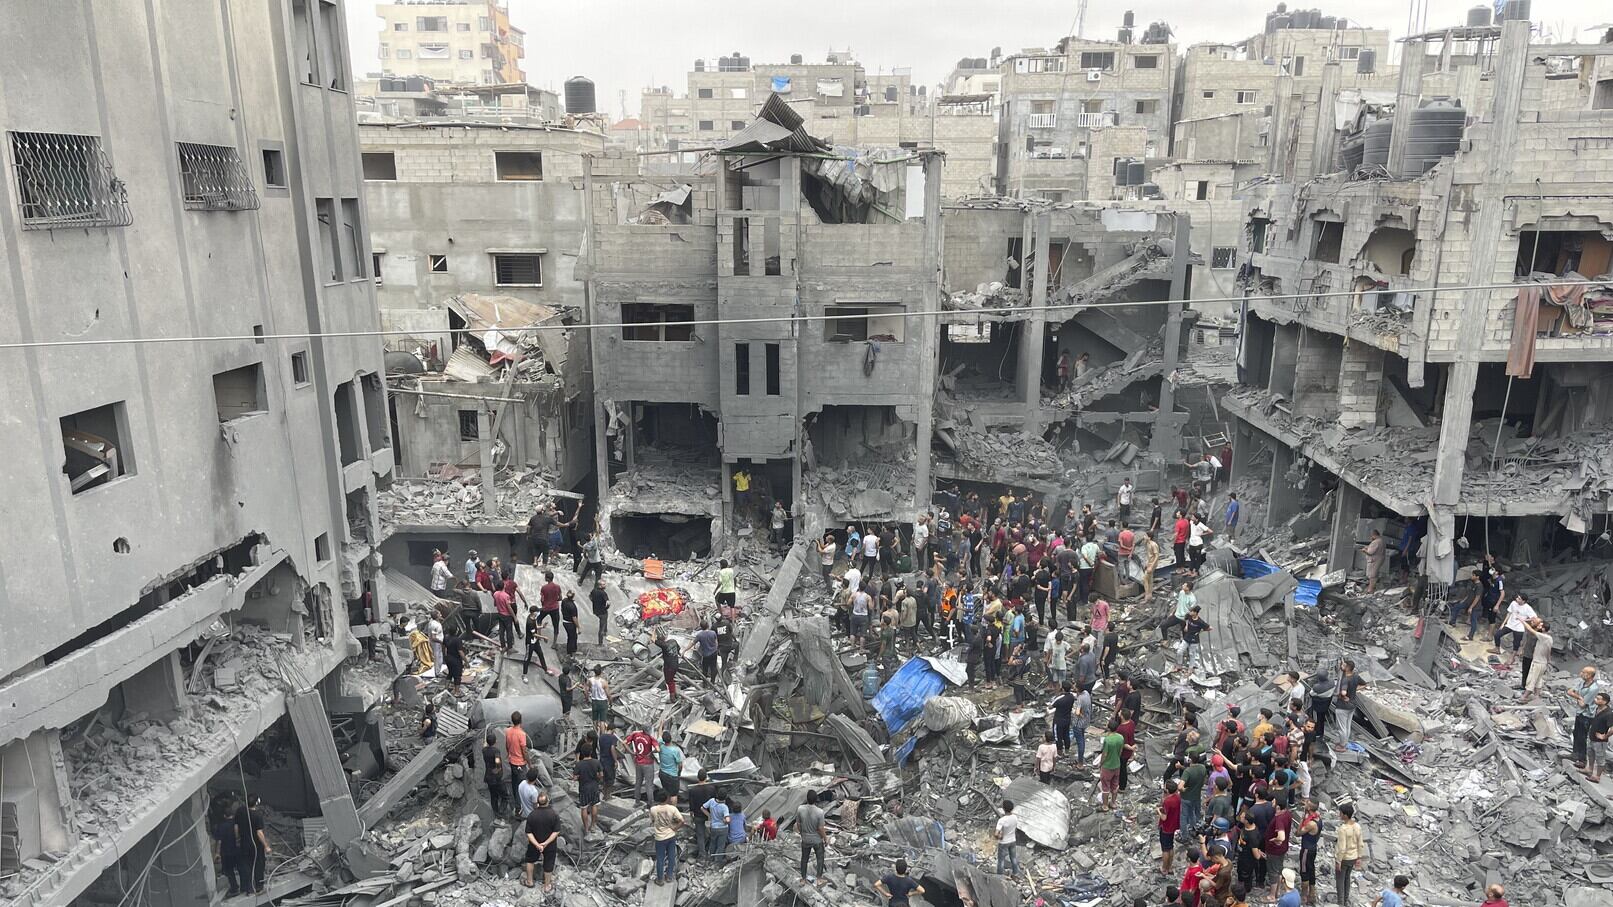 Palestinians look for survivors after an Israeli air strike on buildings at Shati refugee camp (AP)